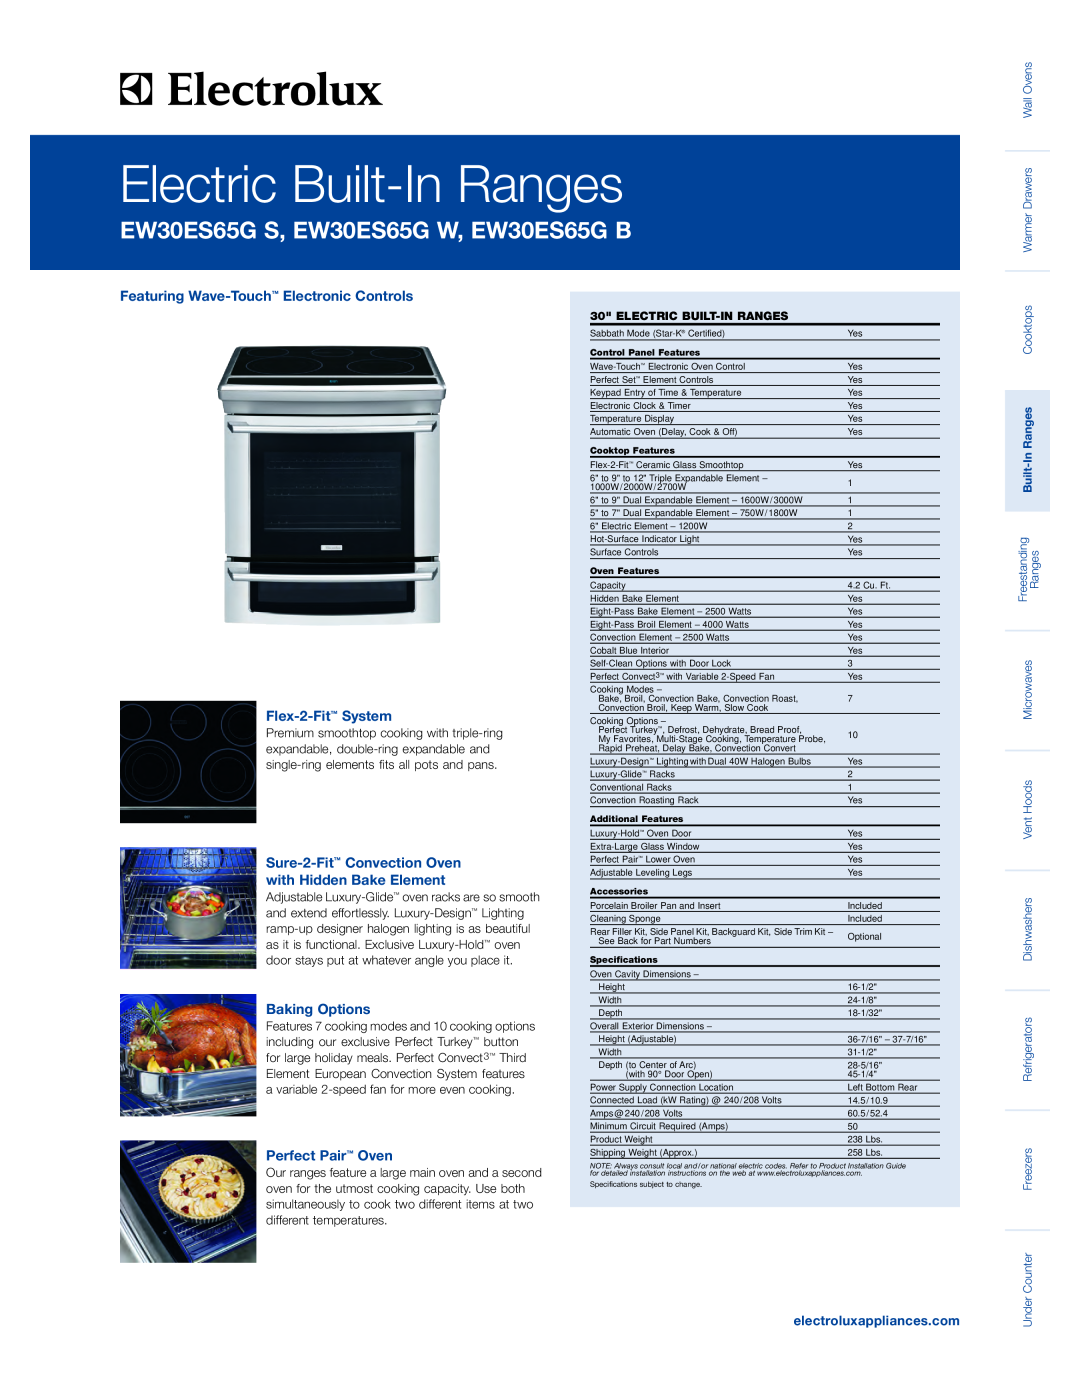 Electrolux EW30ES65G B specifications Featuring Wave-Touch Electronic Controls Flex-2-Fit System, Baking Options 